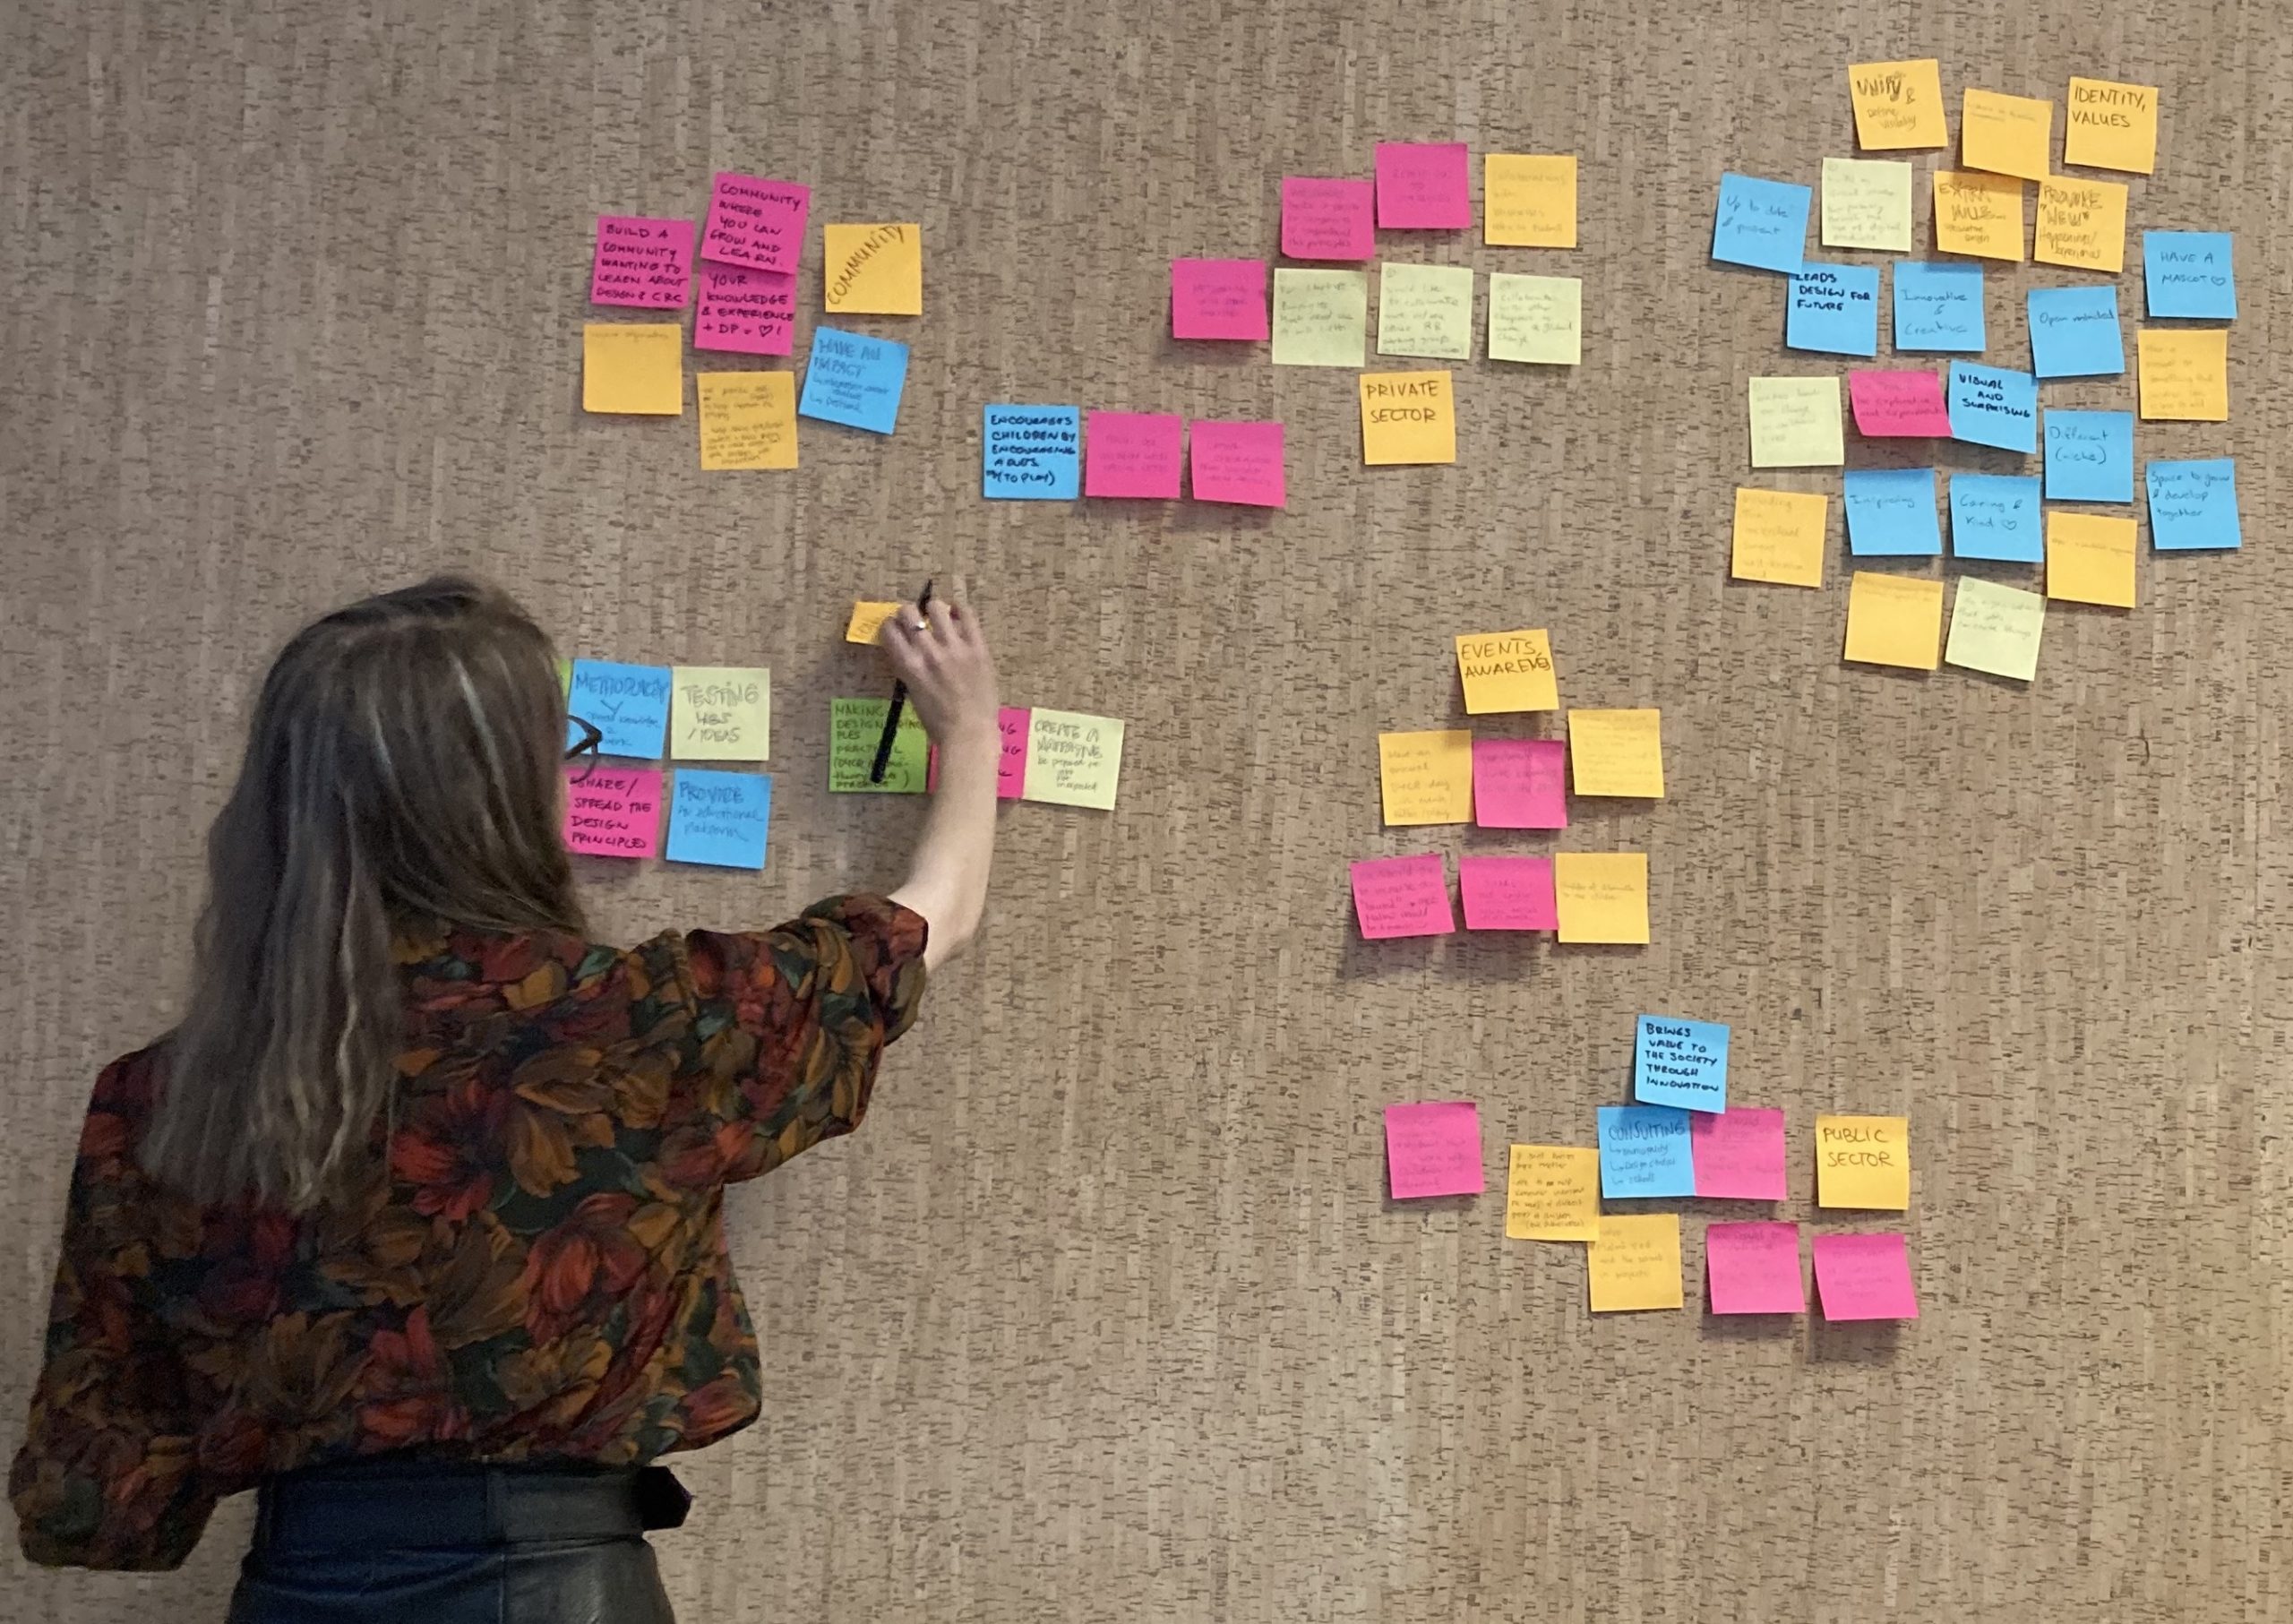 Young lady on the left adding colorful post-it notes on the wall during a workshop.